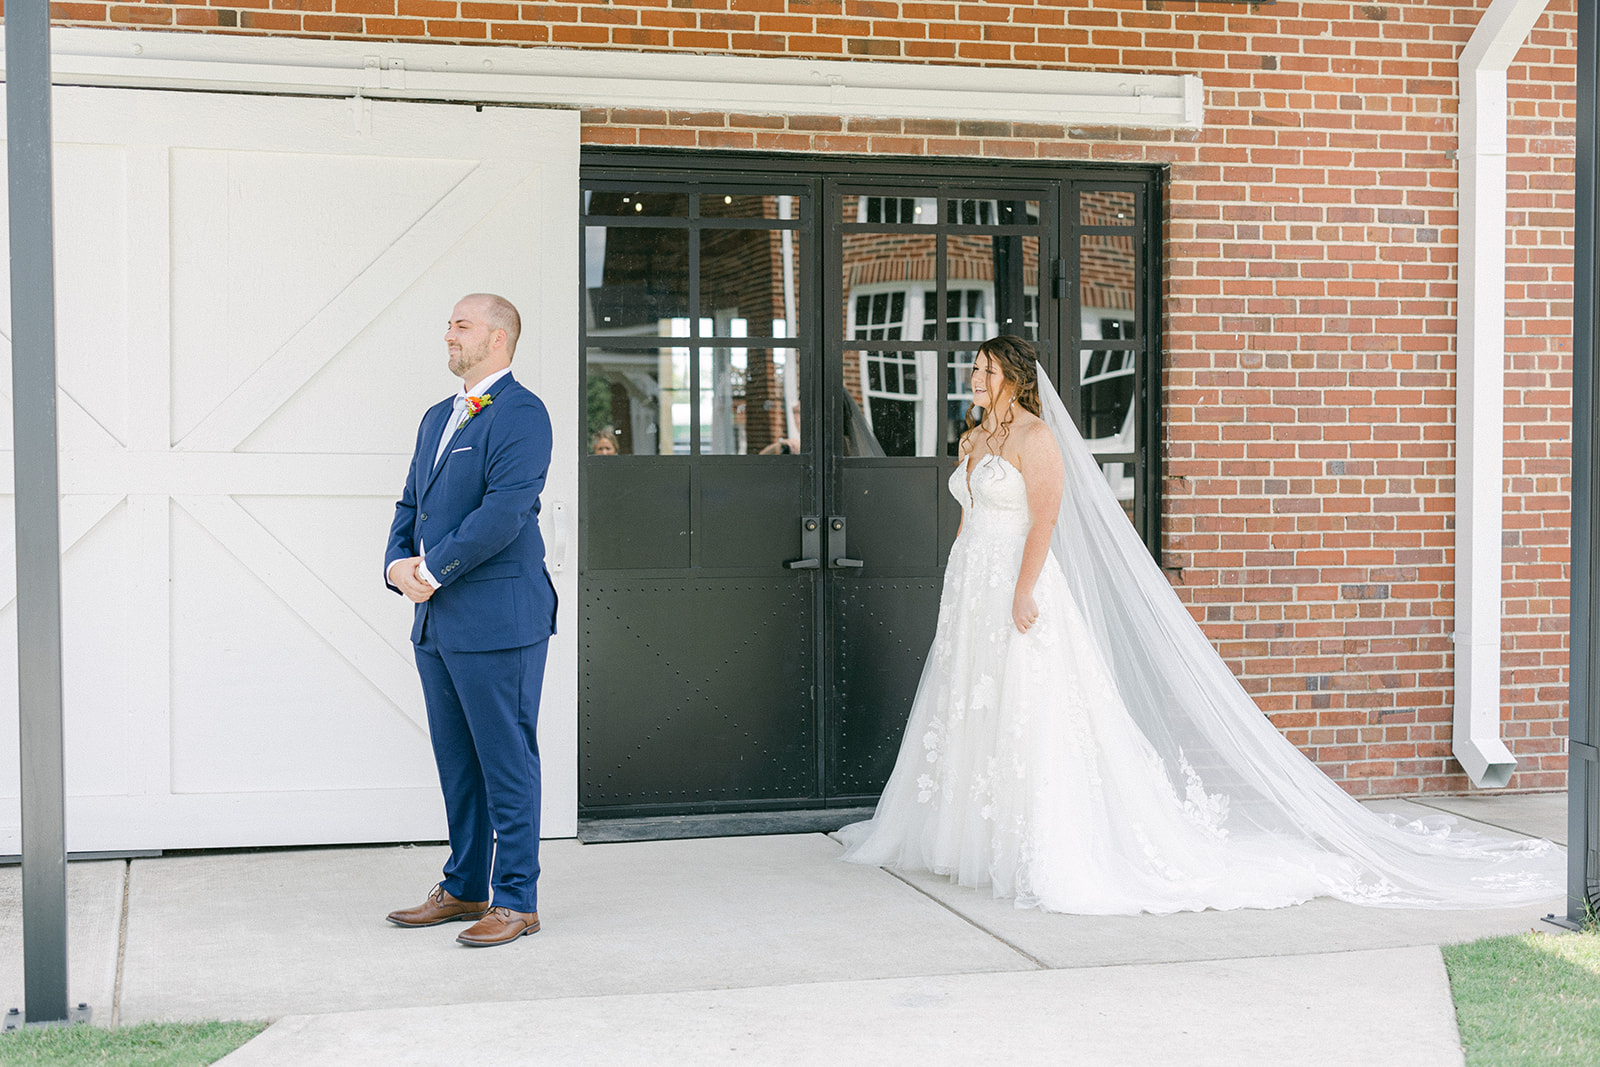 Bride standing behind groom for first glance photos at The Chair Factory